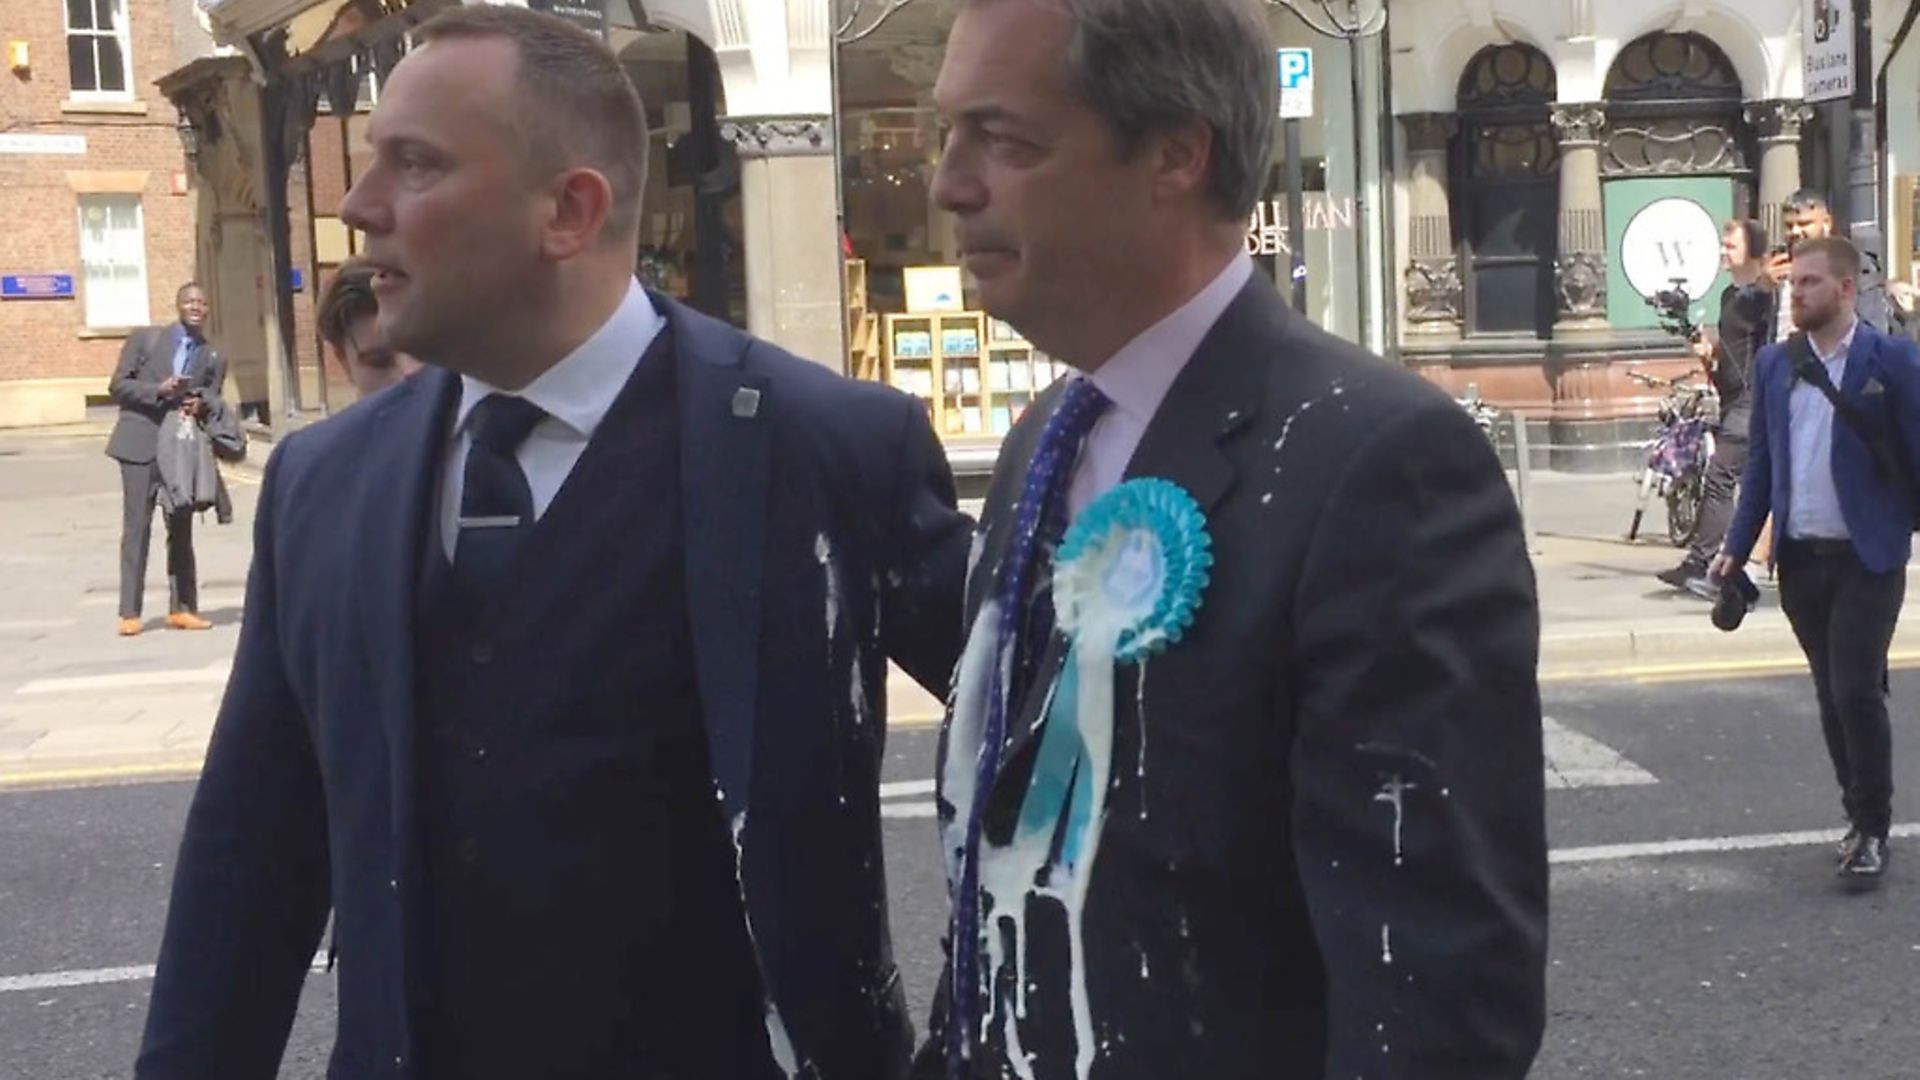 Nigel Farage after he was doused in milkshake during a campaign walkabout in Newcastle. (Tom Wilkinson/PA Wire) - Credit: PA